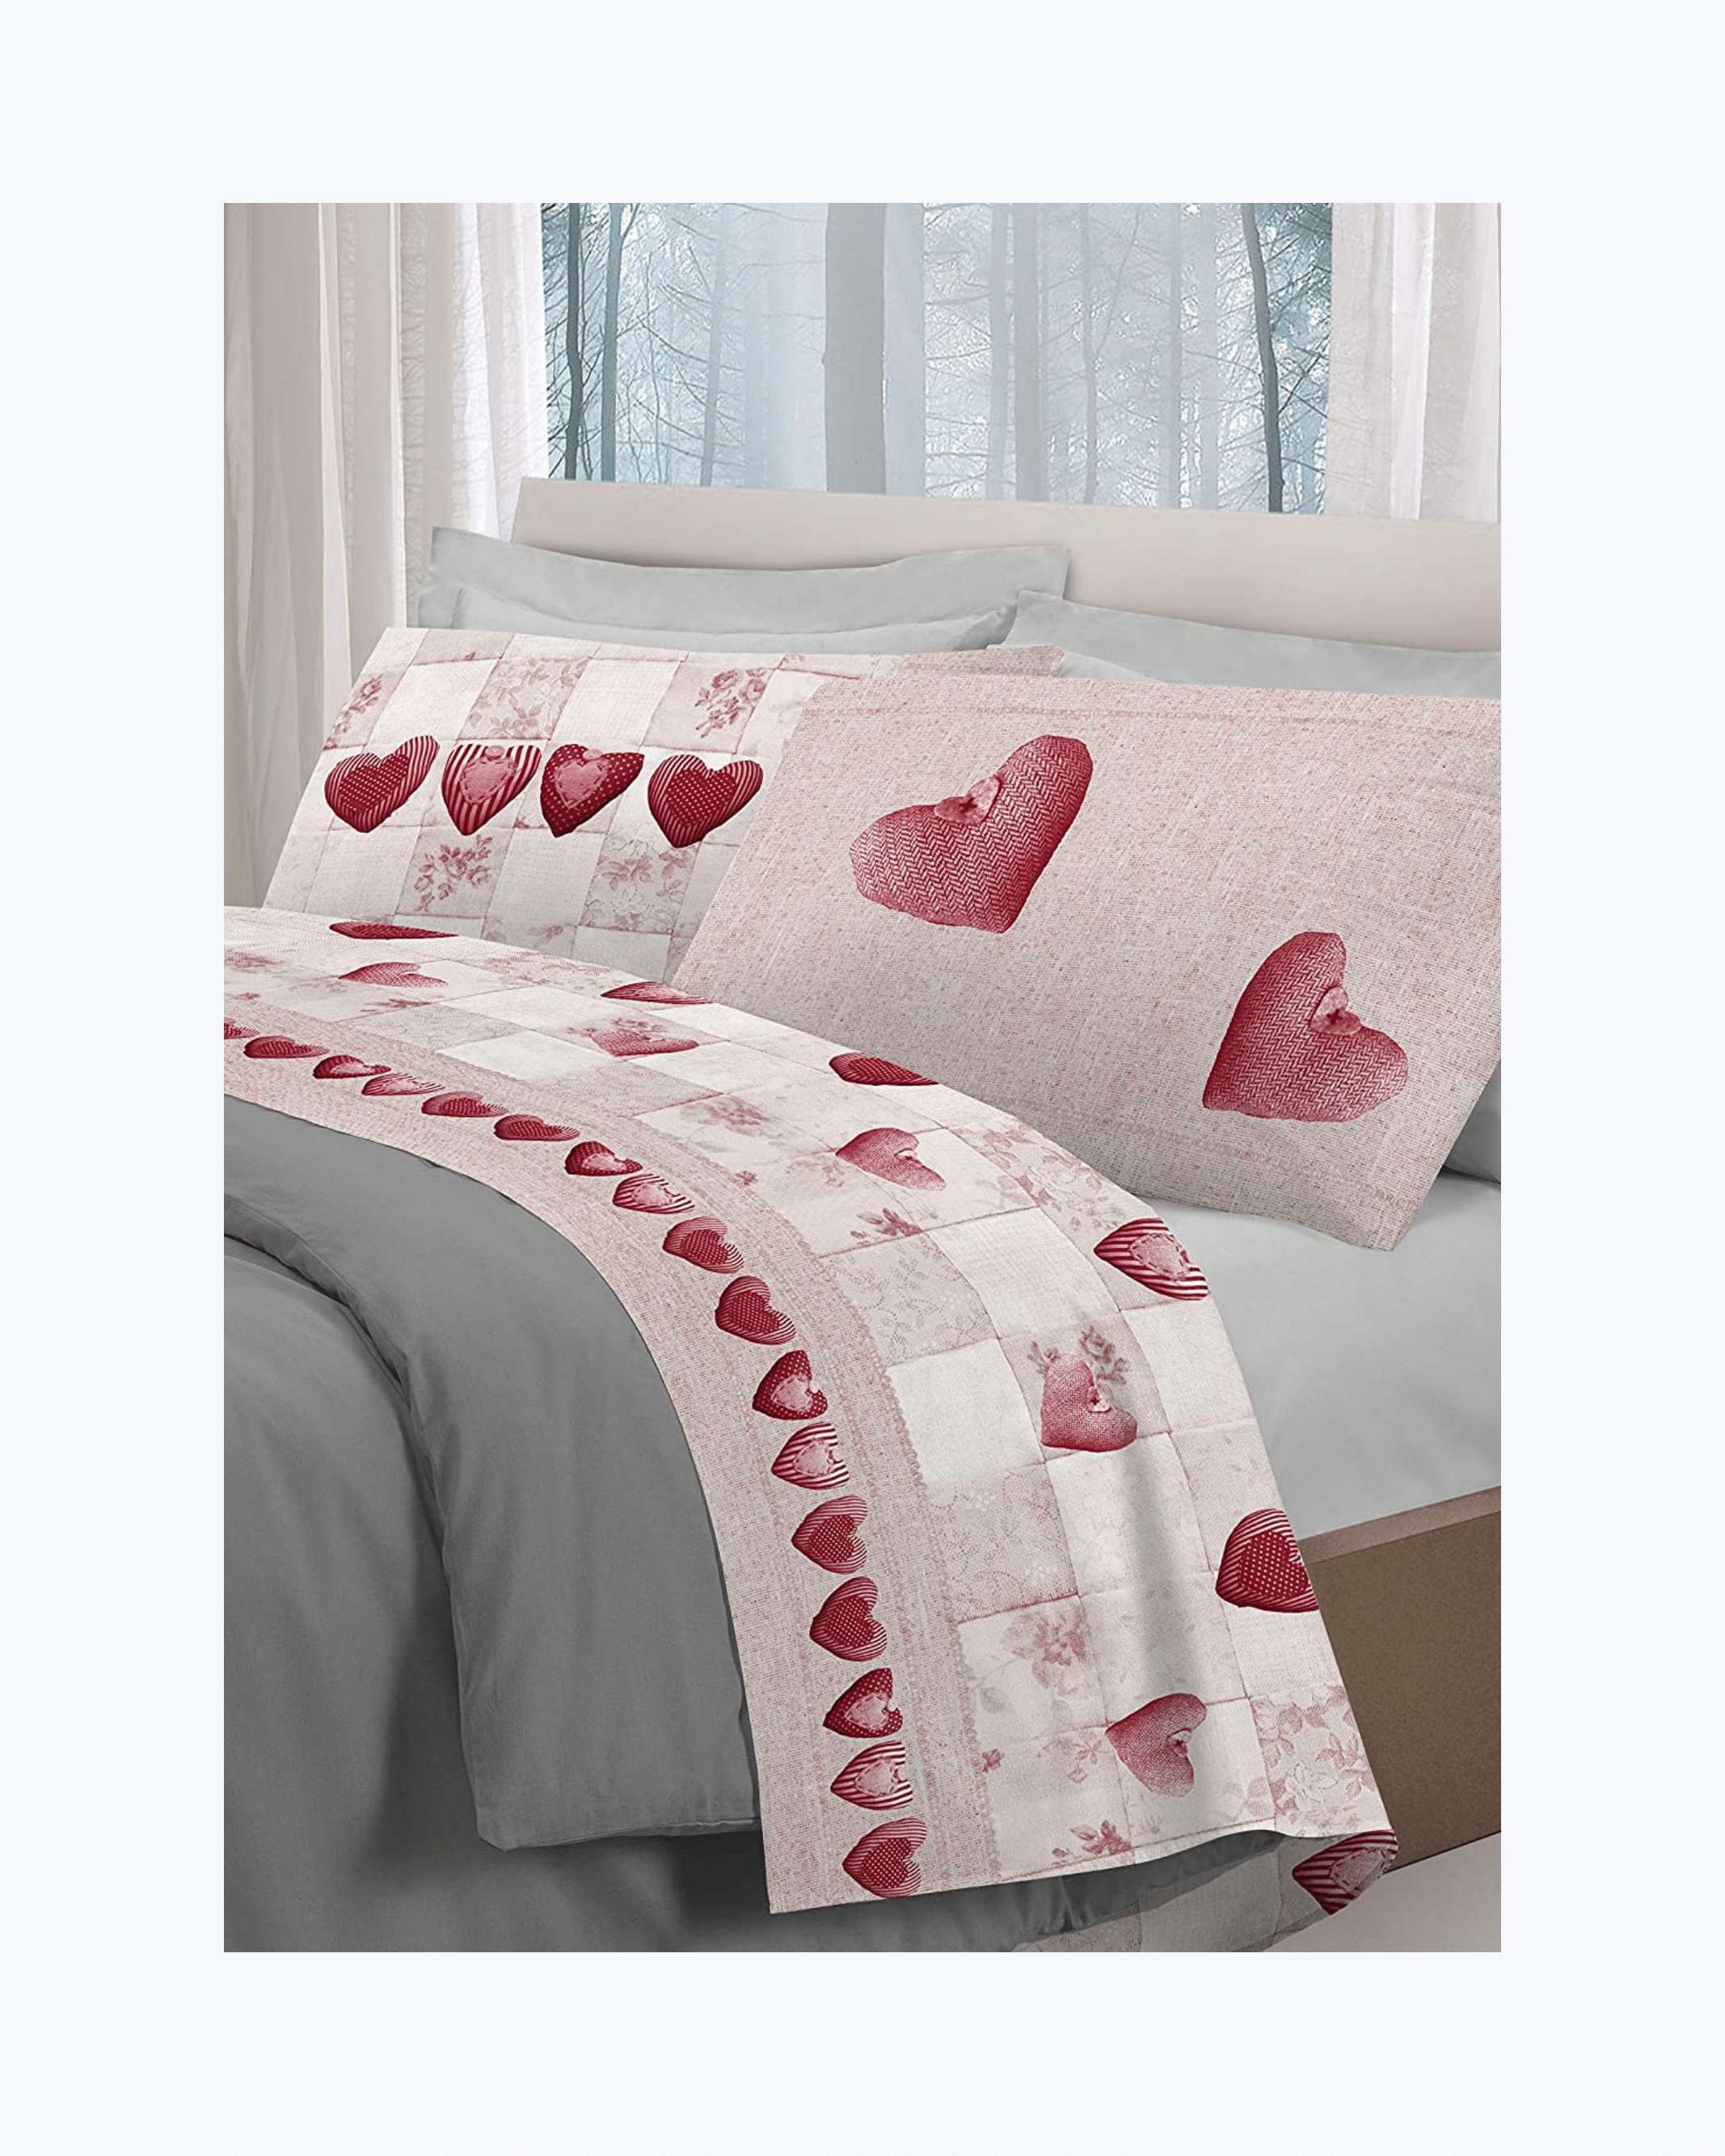 Set Lenzuola Letto in Cotone Made in Italy - Completo Letto Stampa Patchwork Rosso